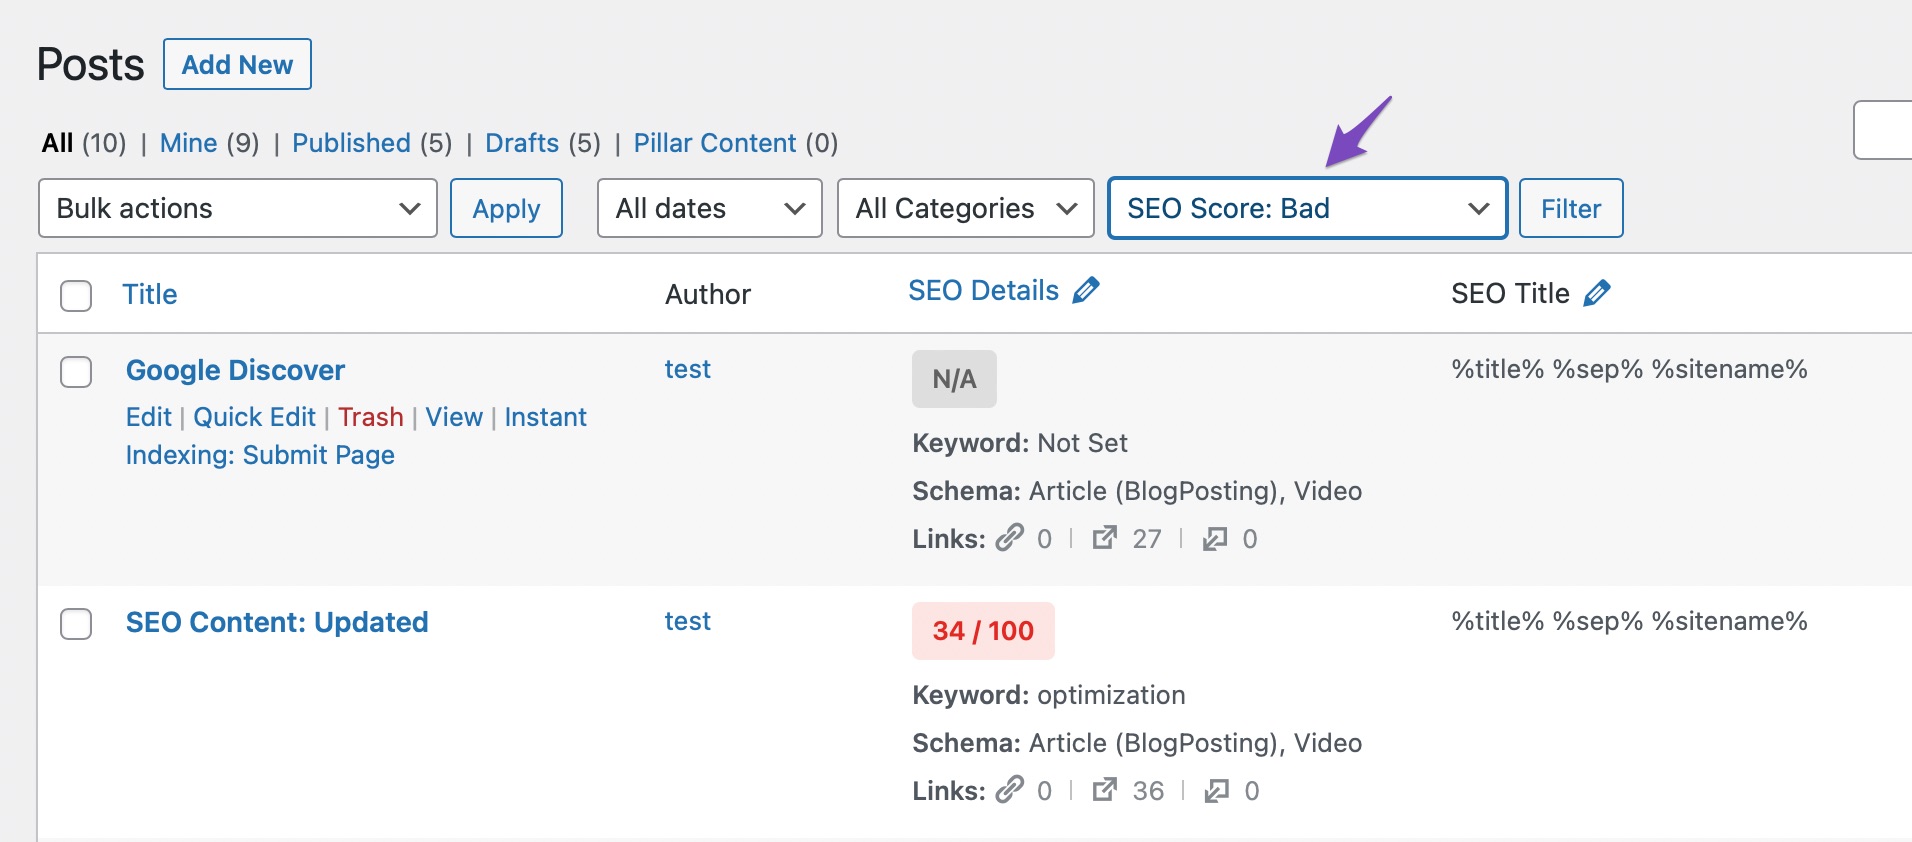 Filter posts by bad seo score